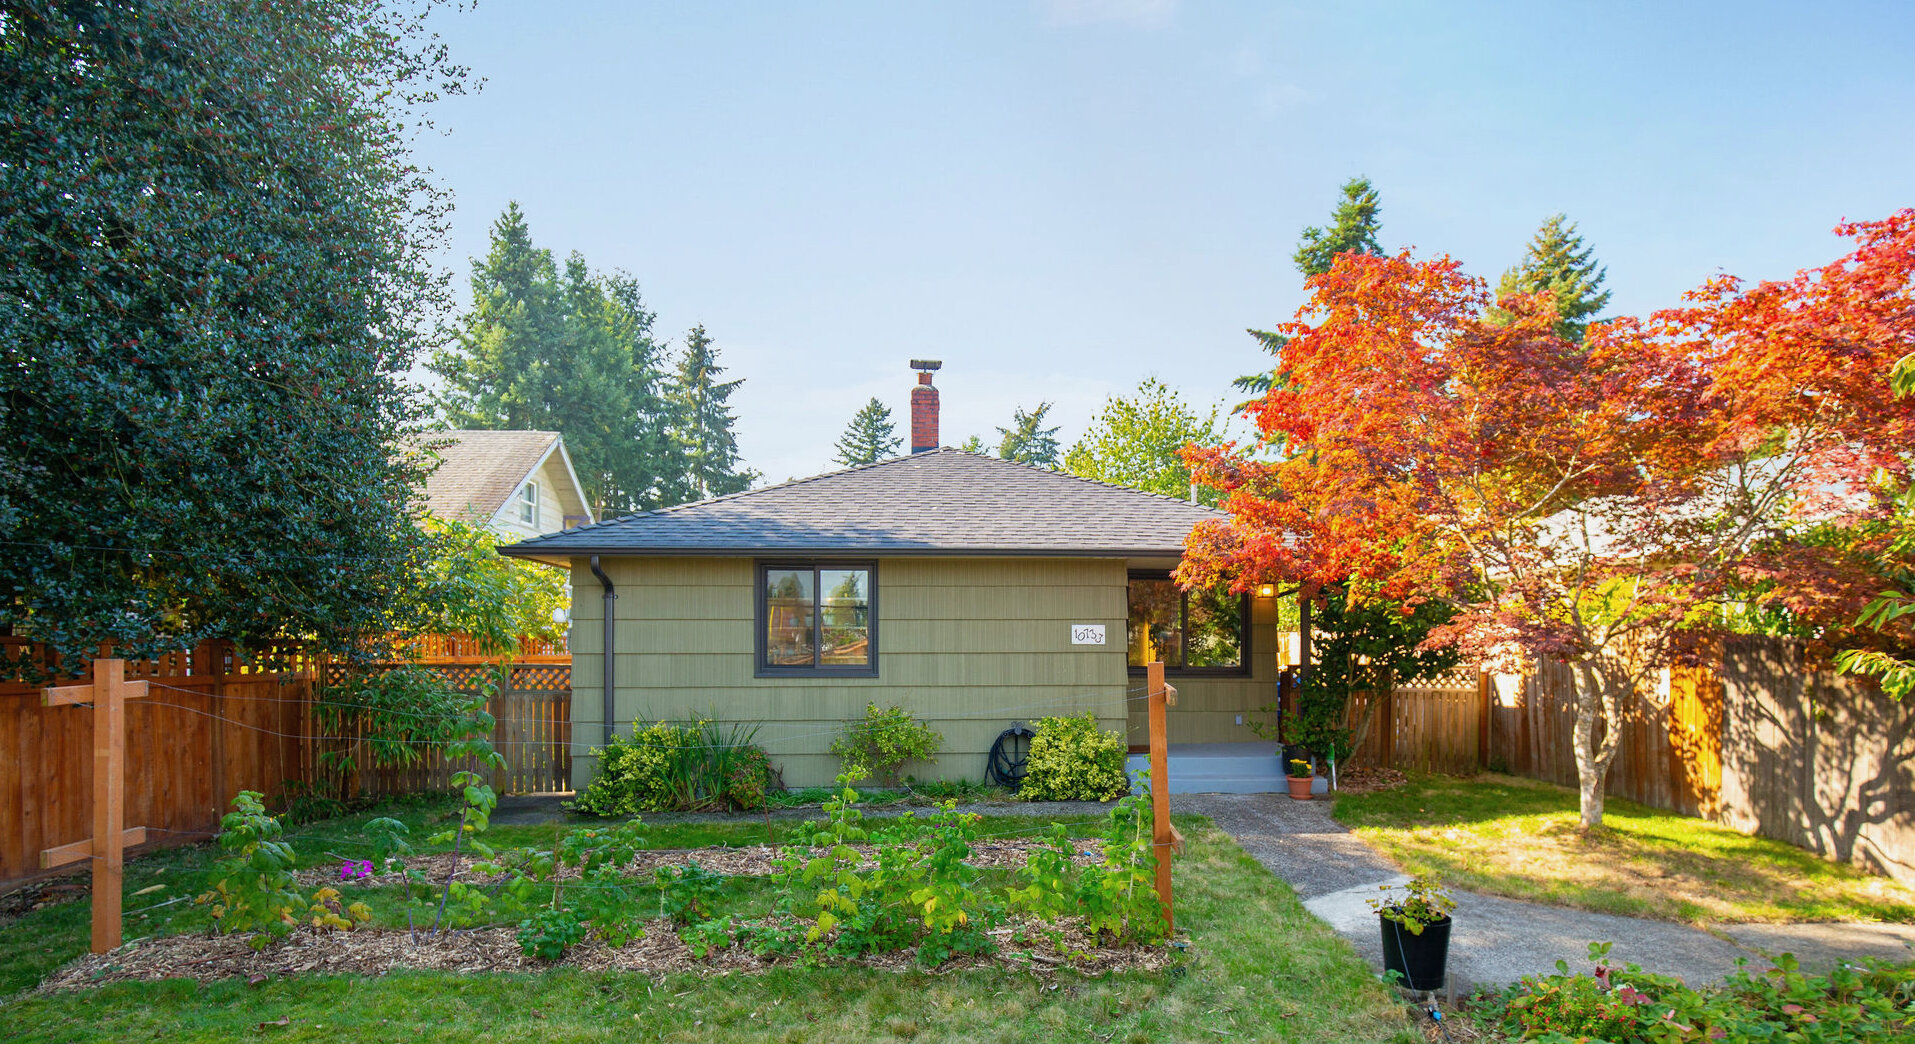  This home has been lovingly maintained, including a new roof in 2018 and all new Milgard windows in 2020. 